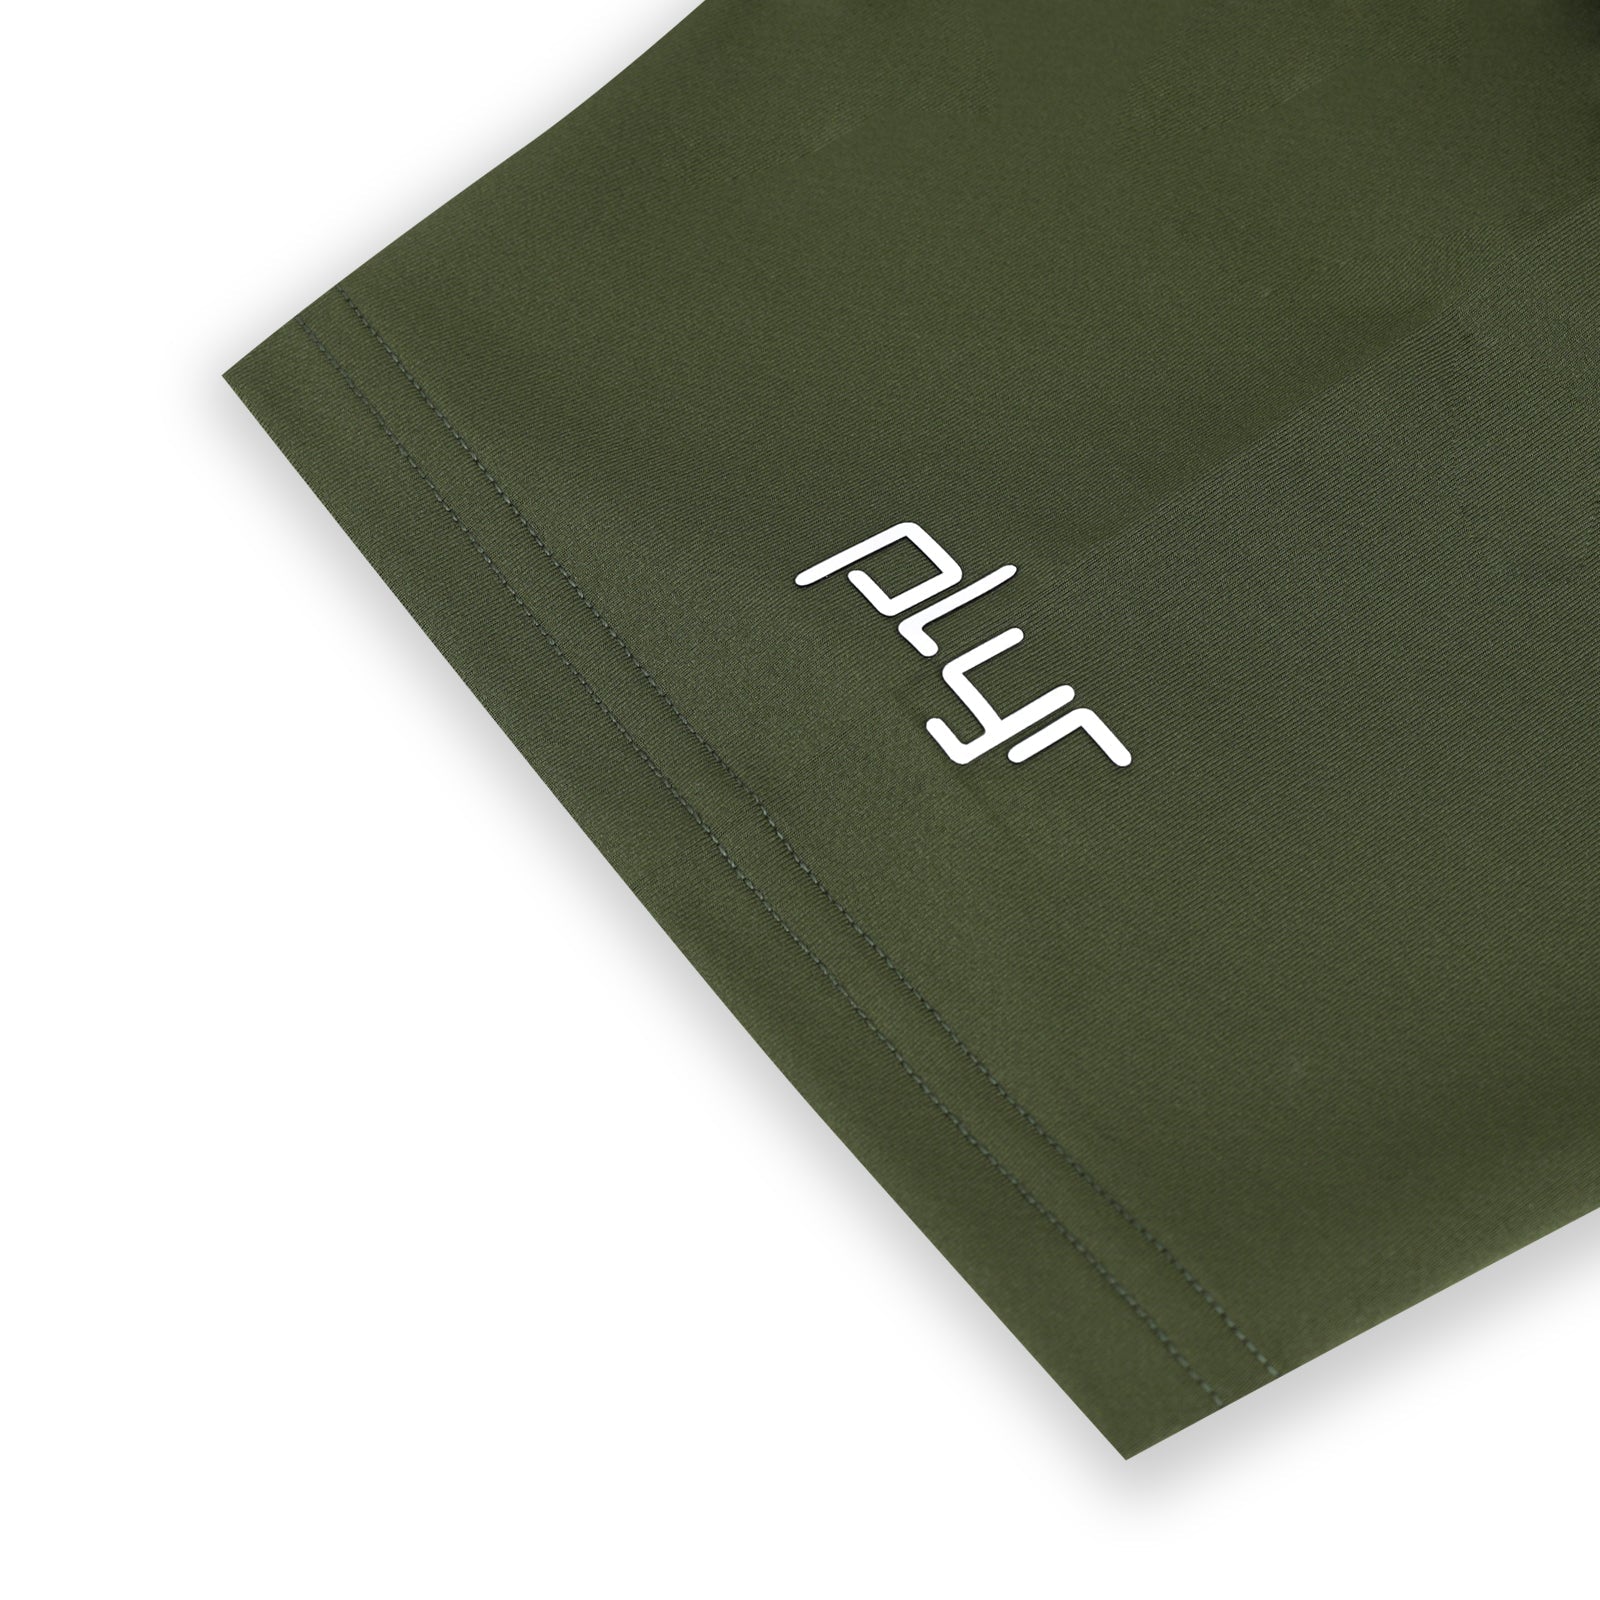 Statement Polo - Army Green